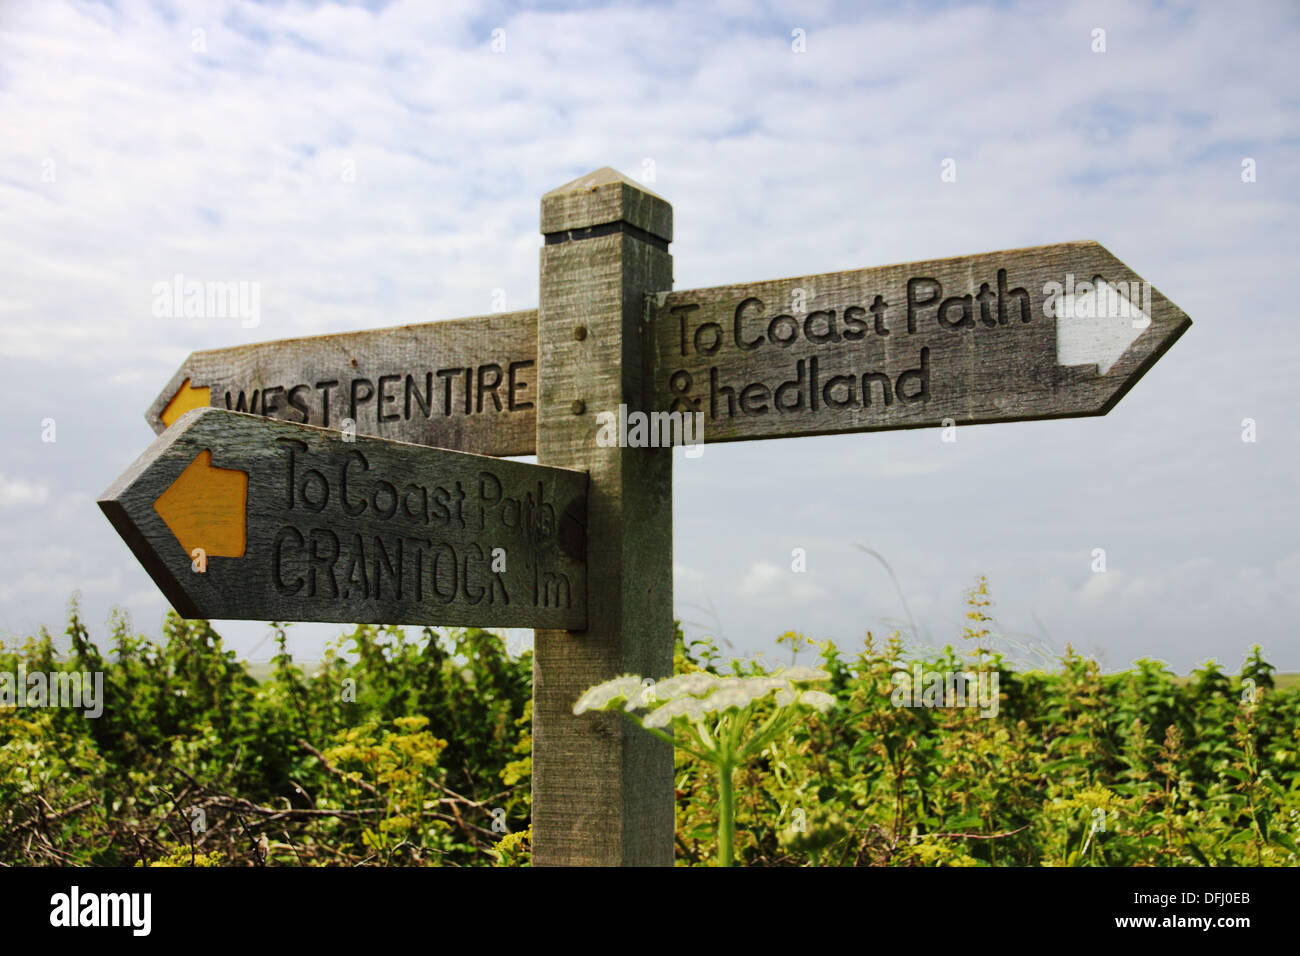 A coastal path wooden finger post with yellow arrows and a misspelt word 'headland' Stock Photo